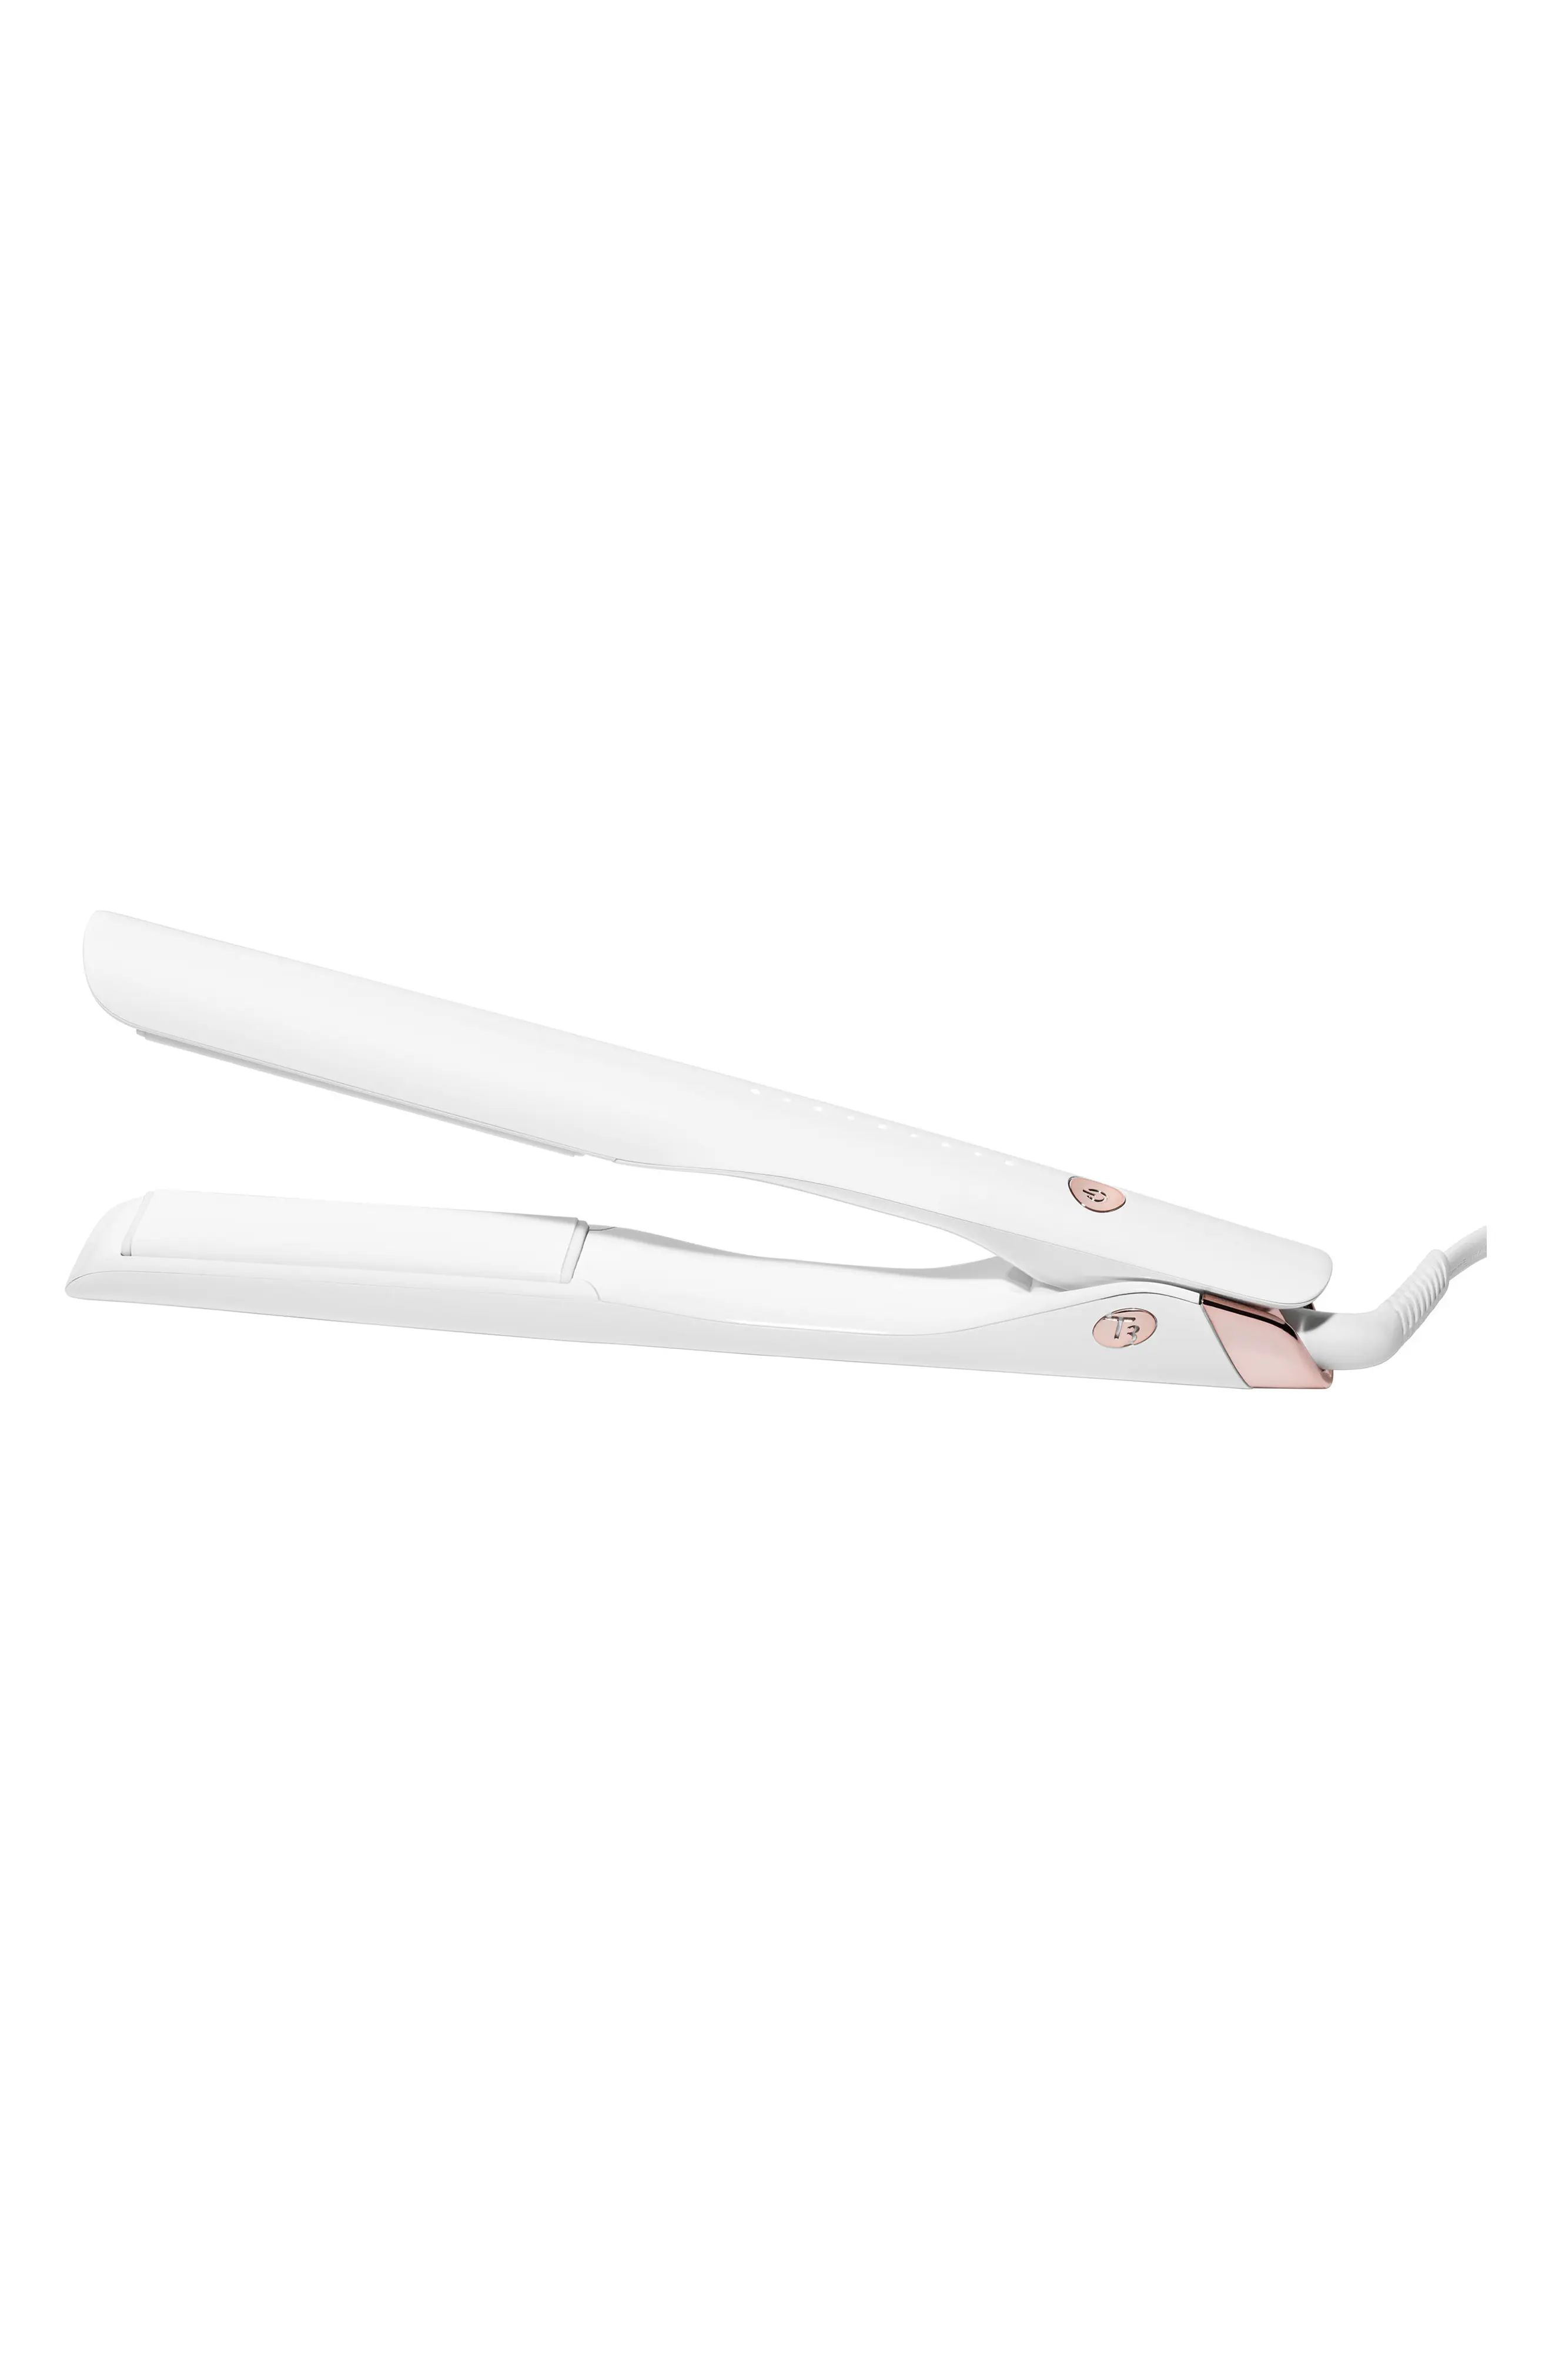 T3 Lucea 1-Inch Professional Straightening & Styling Flat Iron, Size One Size - None | Nordstrom